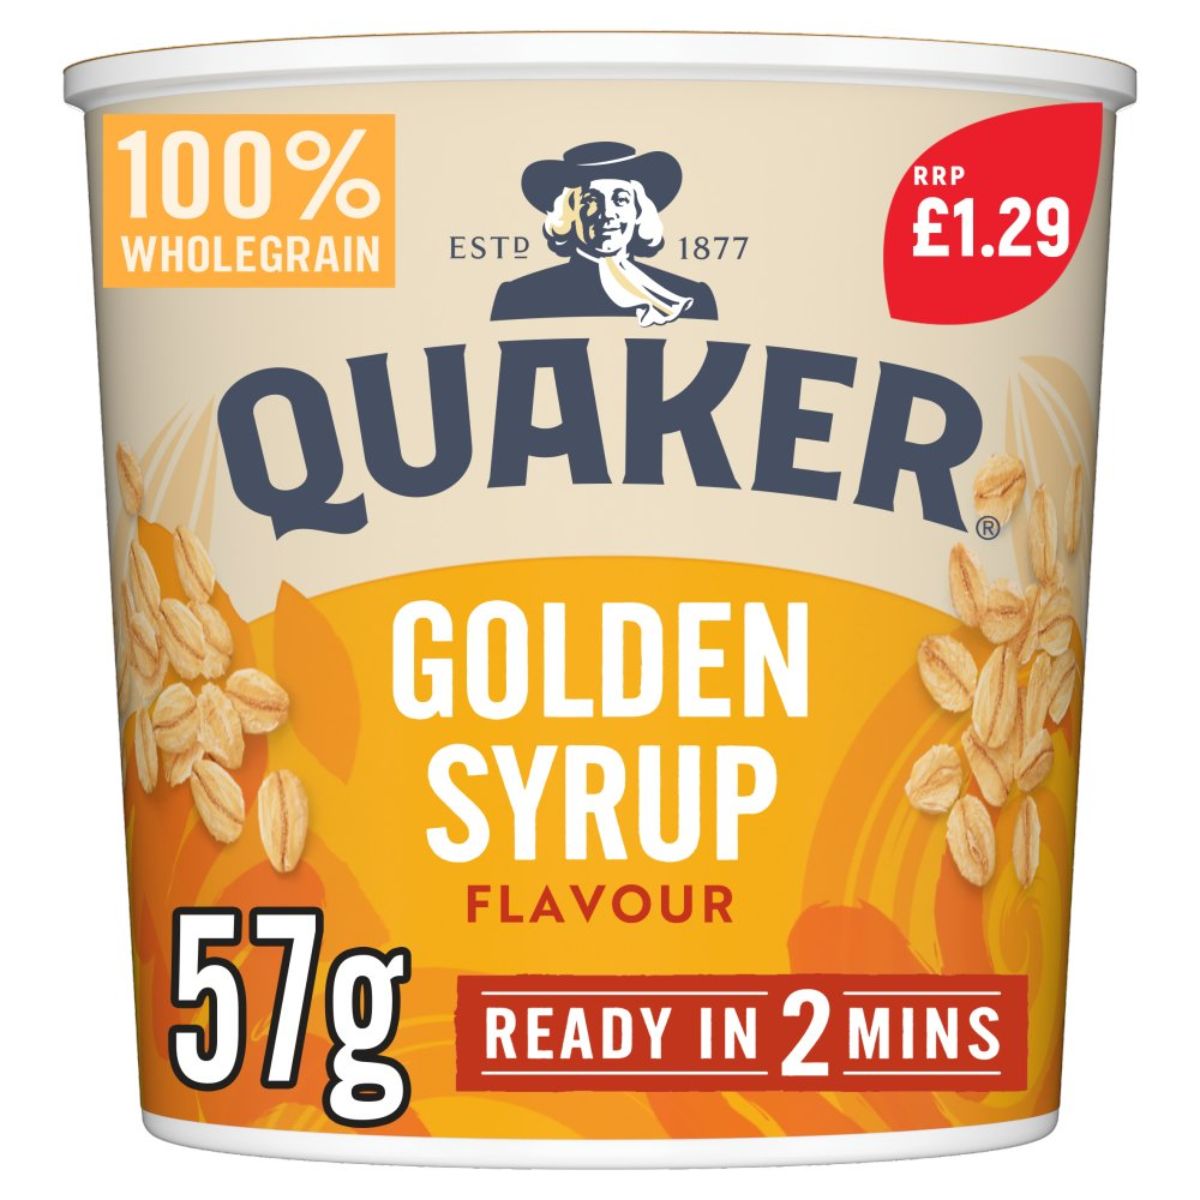 Quaker - Golden Syrup - 57g flavour ready in 2 minutes.